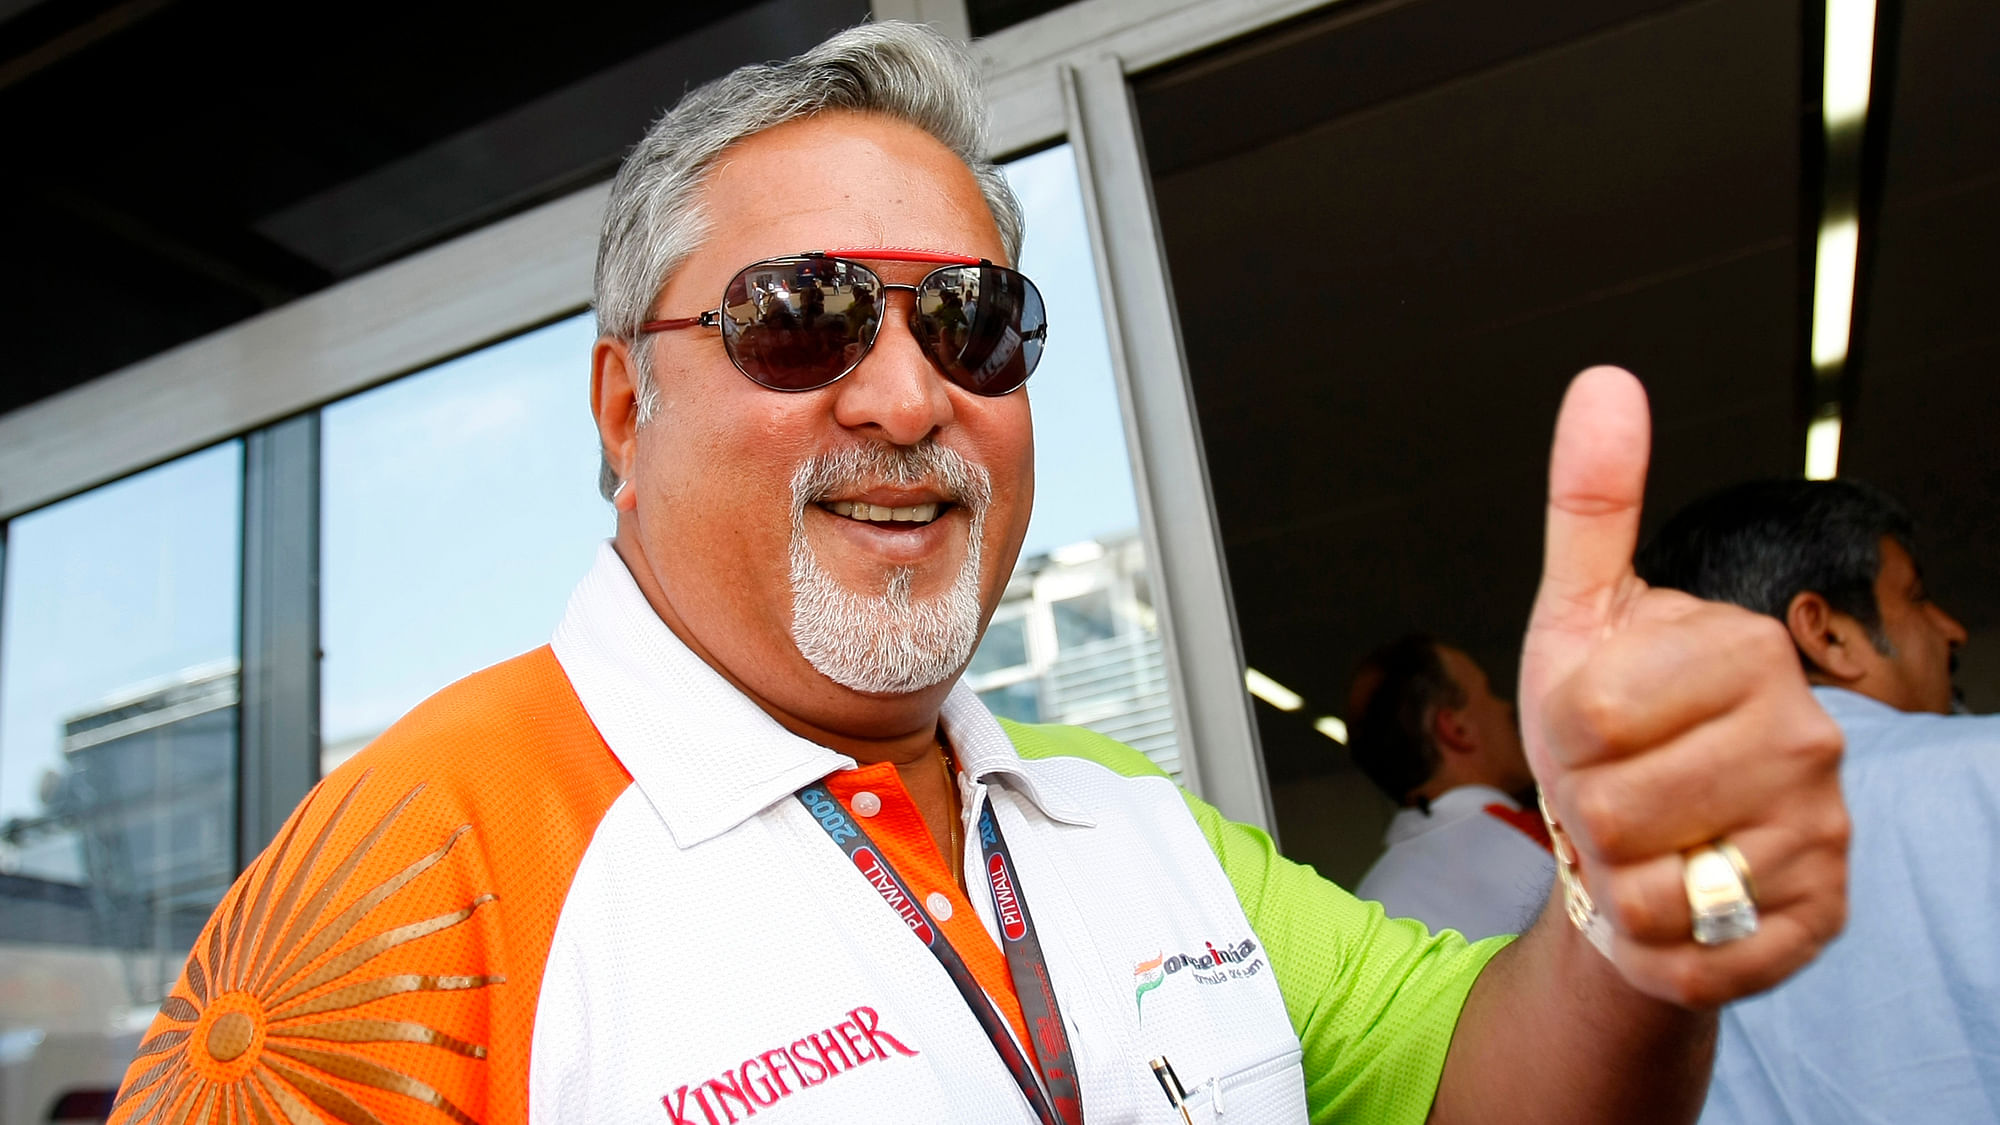 Force India team owner Vijay Mallya gives the thumbs up at the end of the third practice session of the Italian F1 Grand Prix in Monza, 12 September 2009. (Photo: Reuters)